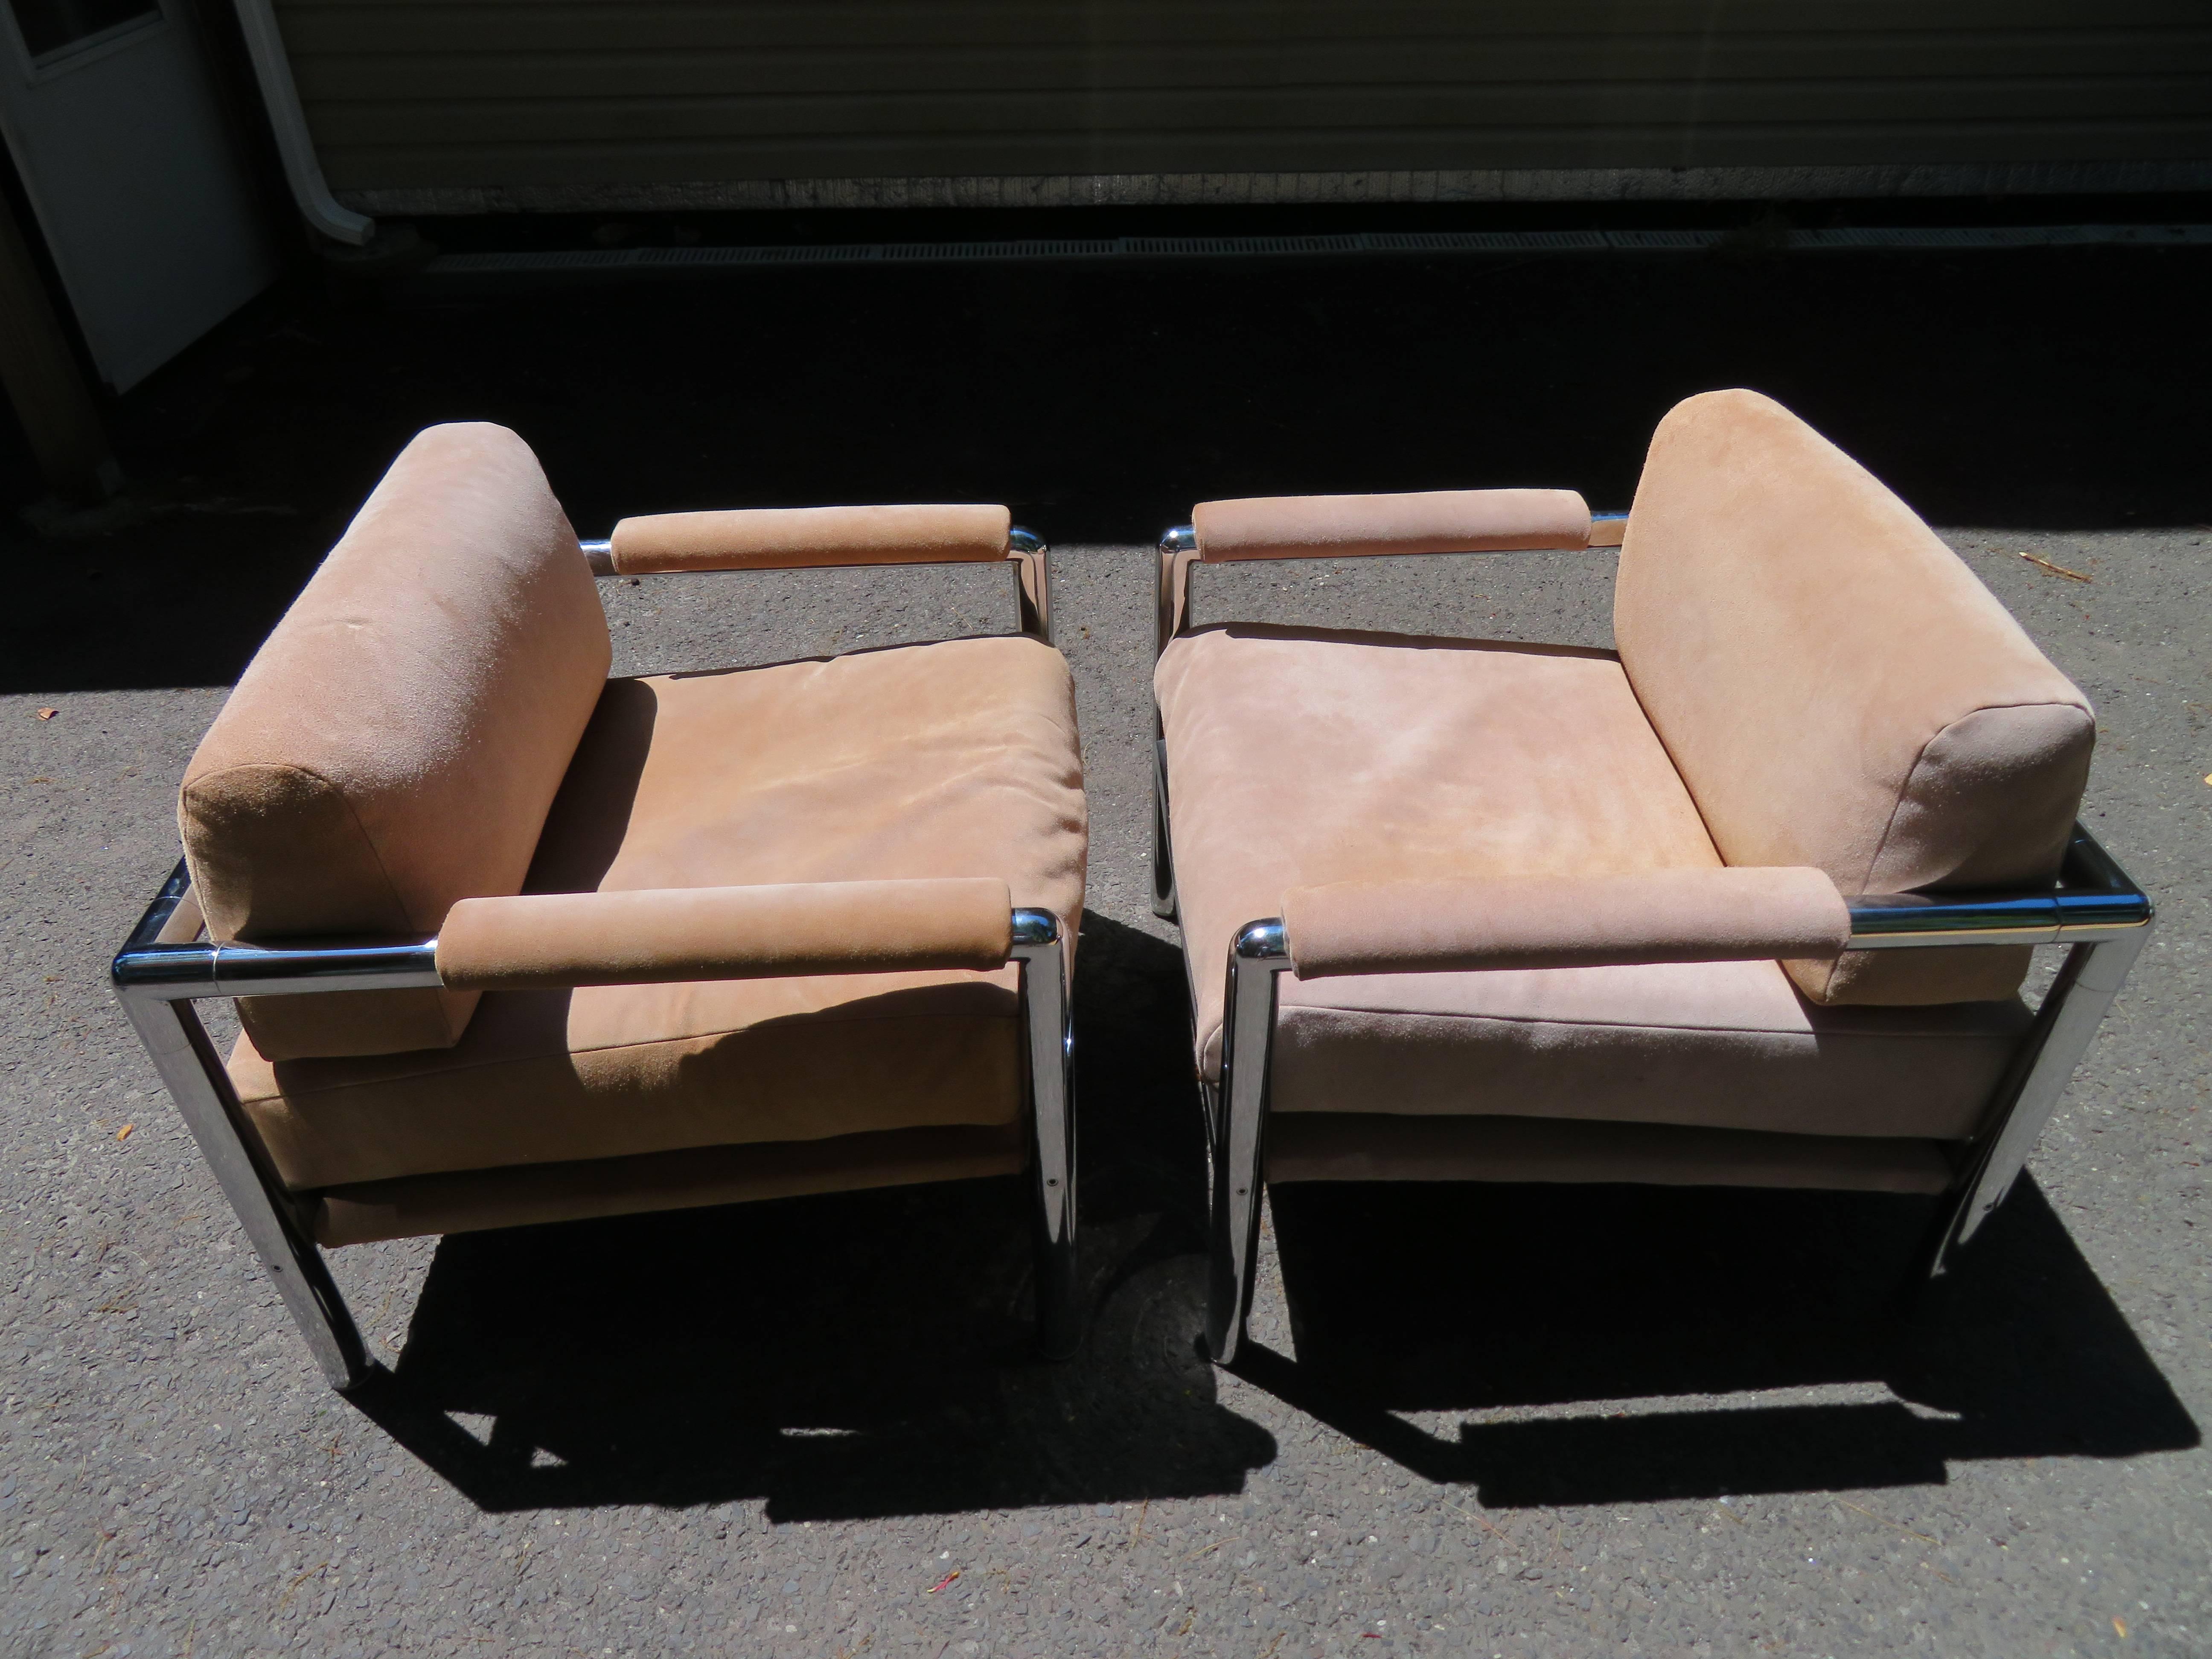 Magnificent pair of Milo Baughman style heavy chrome lounge chairs, circa 1970s. This pair are quite unique with chunky round bars making the frame instead of the usual flat bars. The upholstery is original and is a tan suede-still in usable